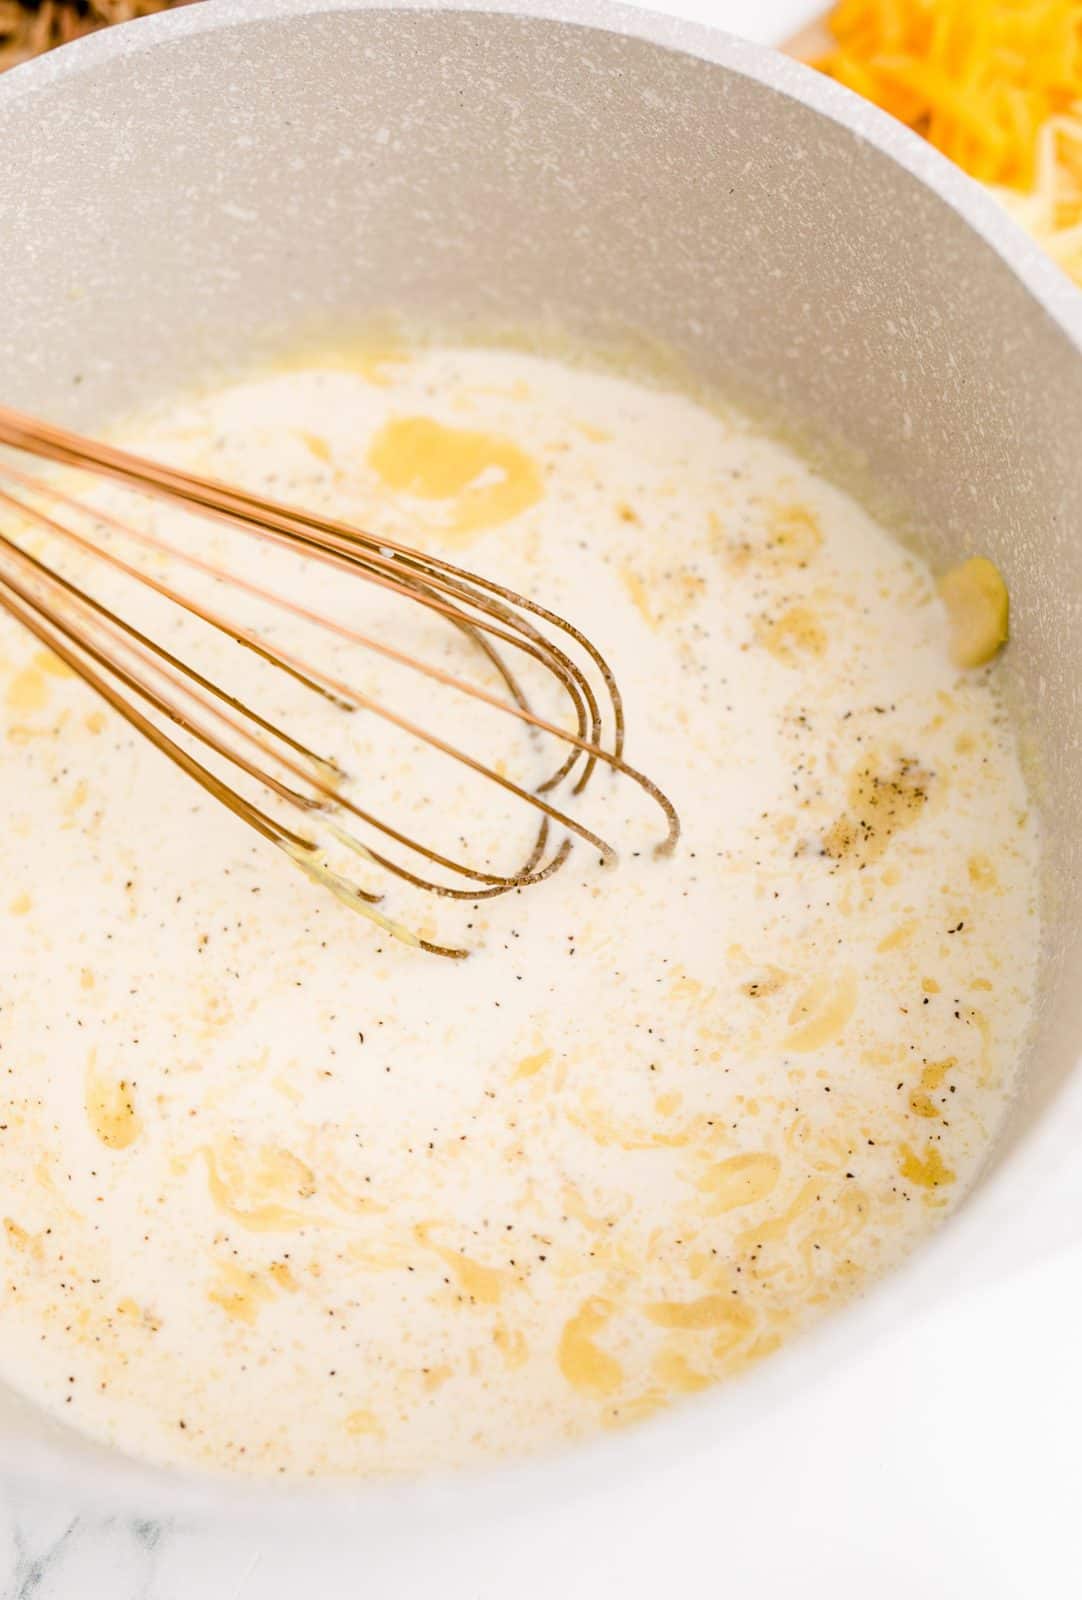 Evaporated milk, chicken broth, salt, pepper, mustard, onion powder, and garlic added to butter and flour mixture with a whisk.